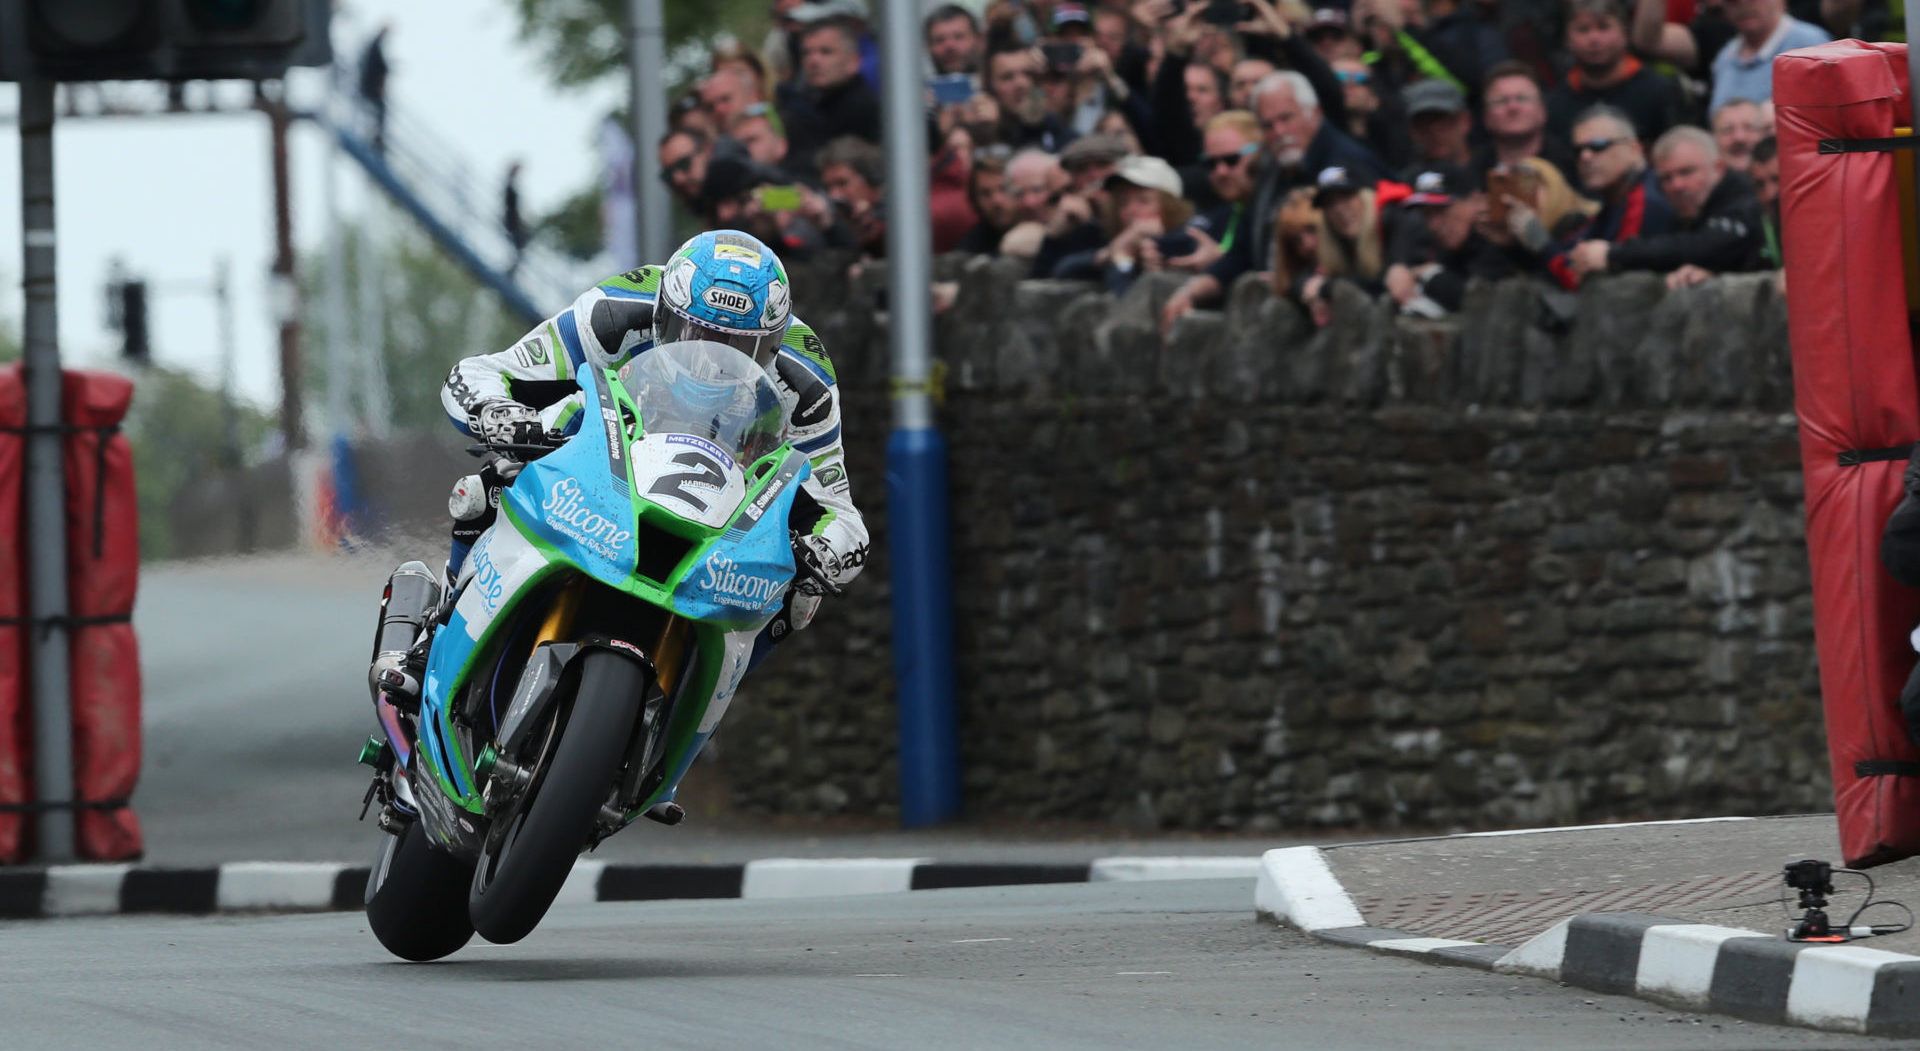 A rider racing during the isle of Man TT.